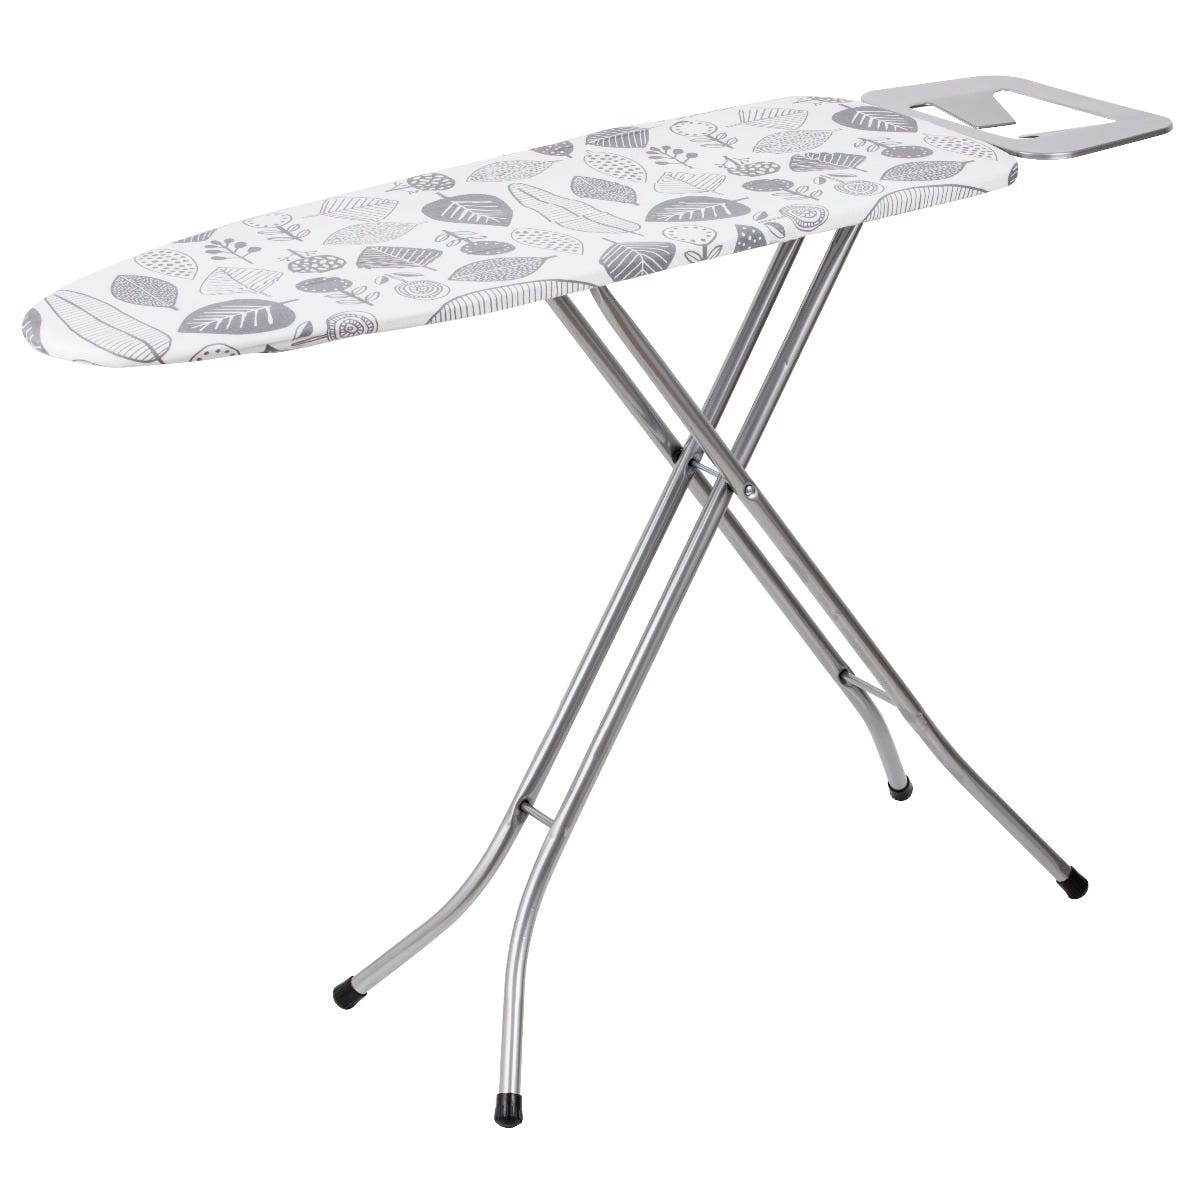 OurHouse Compact Ironing Board 30x90